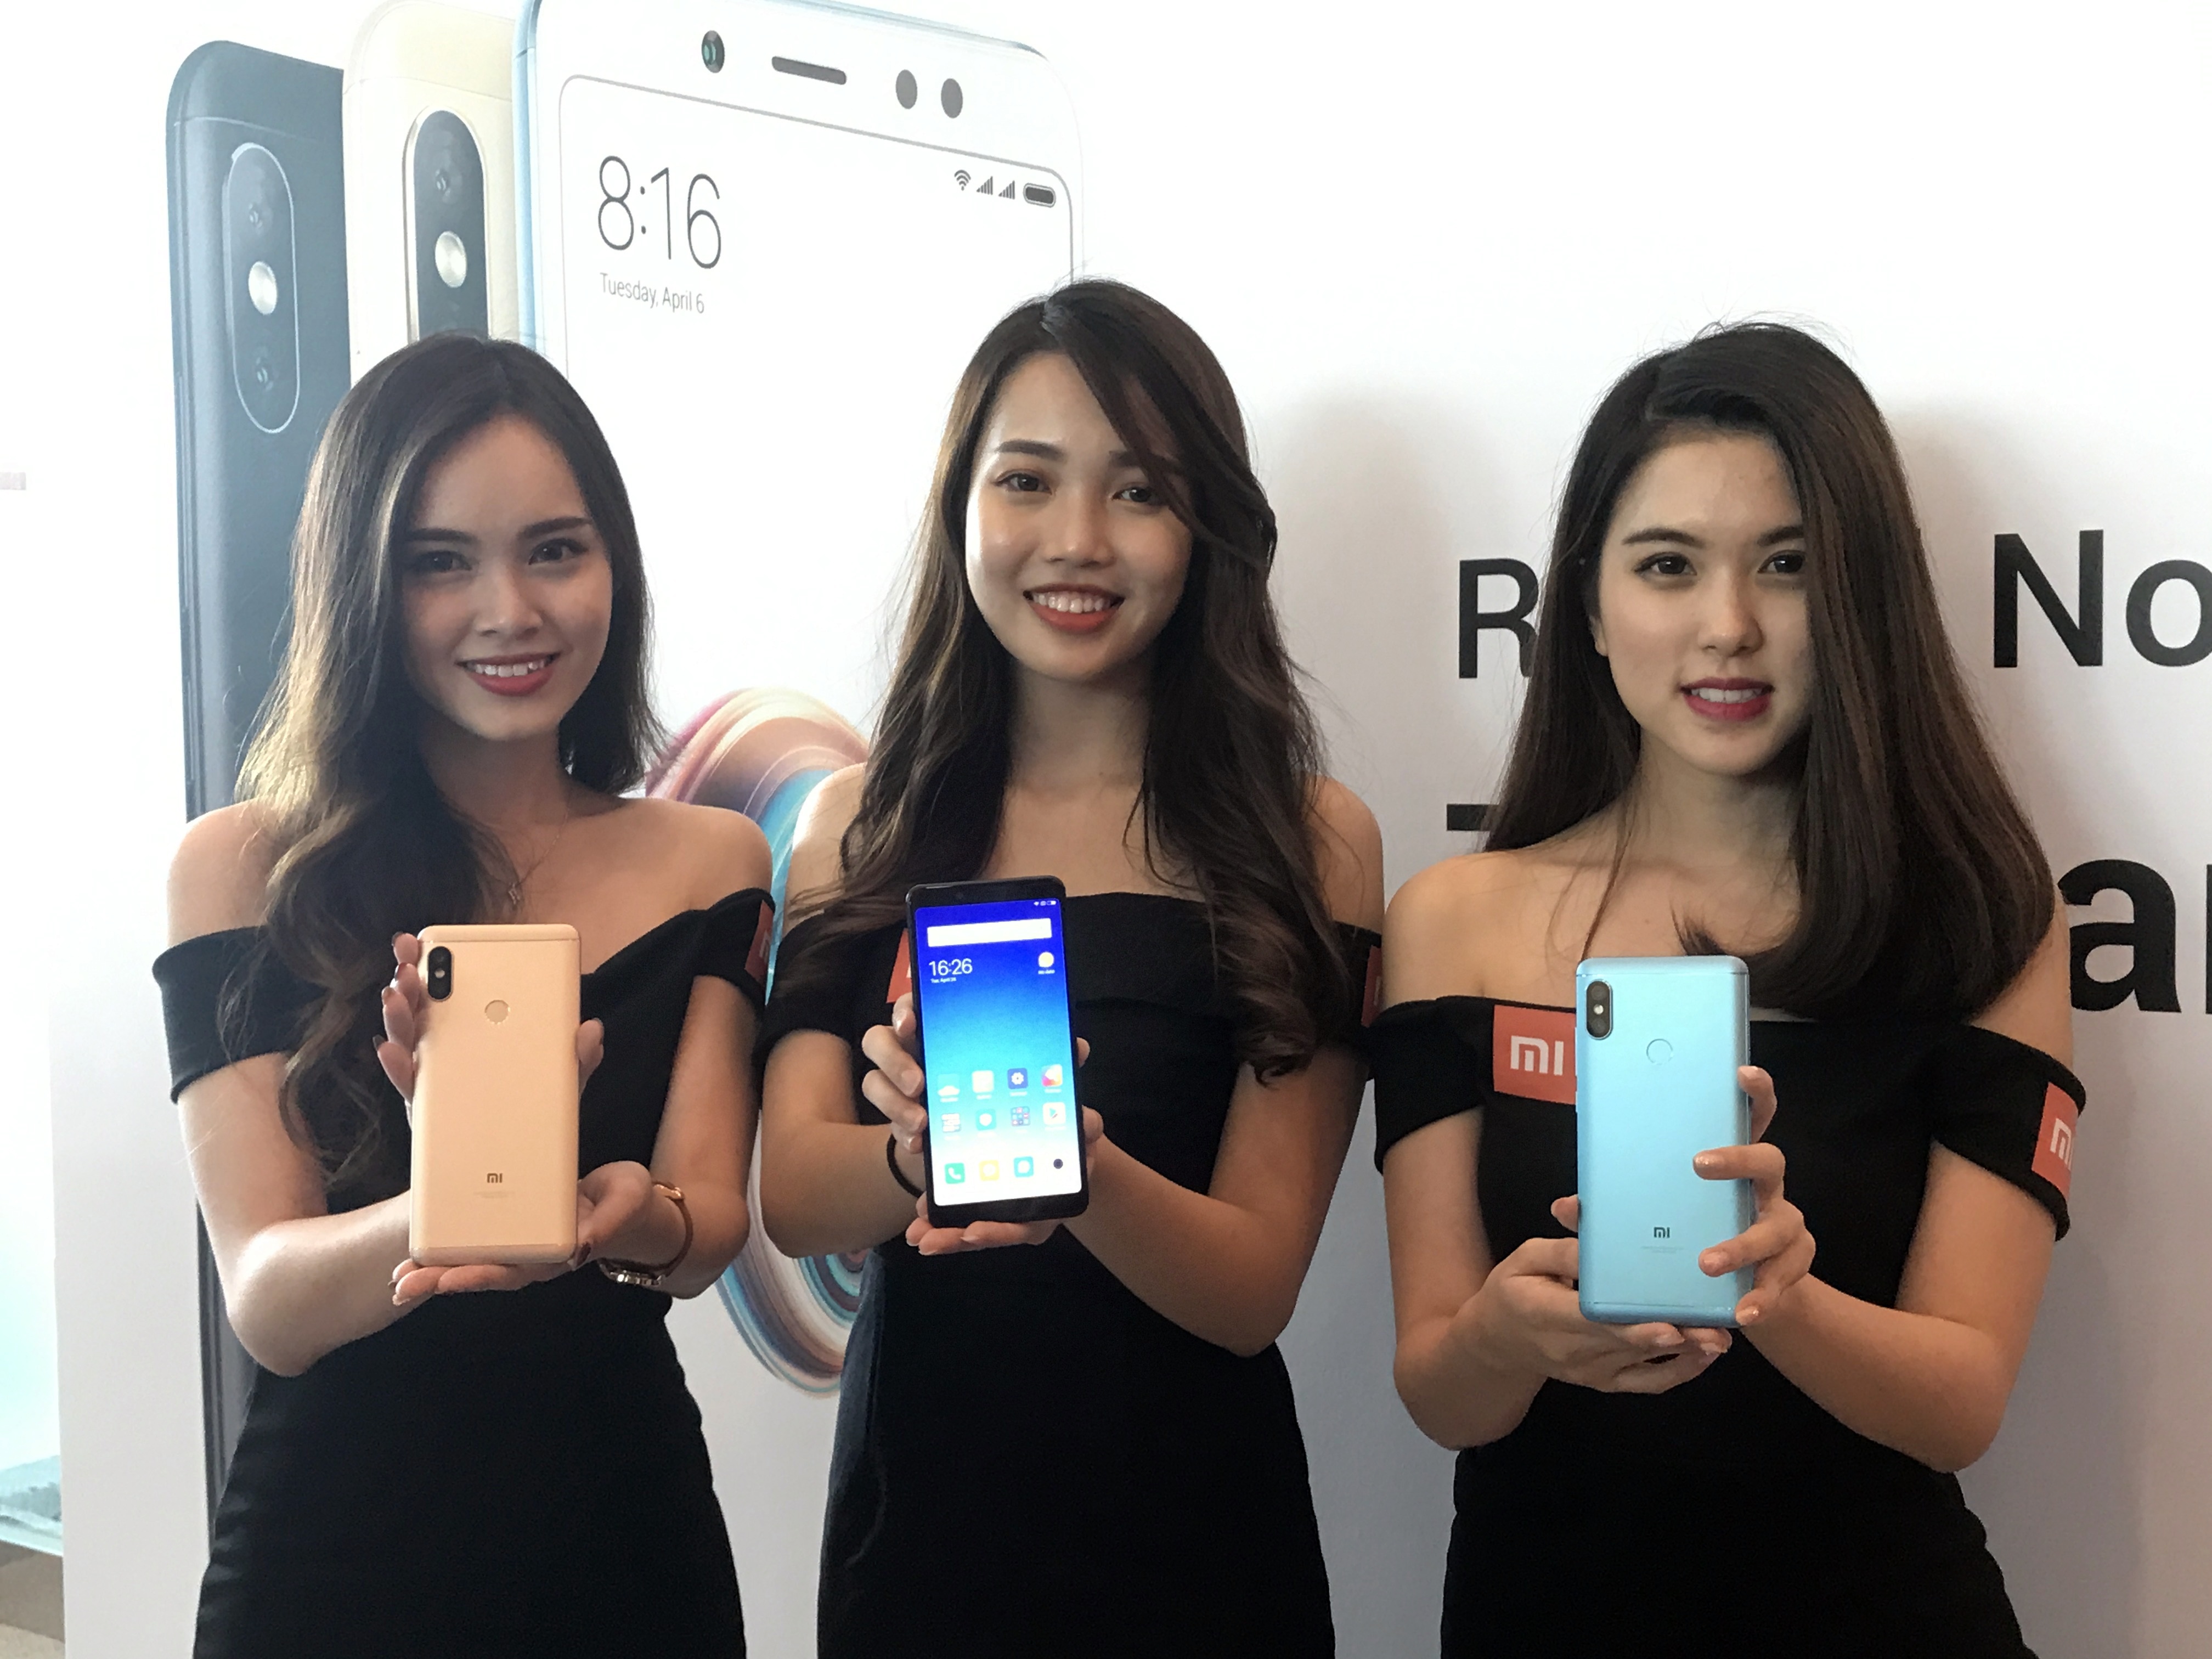 Xiaomi Redmi Note 5 announced in Malaysia with 4000mAh battery, dual rear camera, AI Beauty Mode 4.0 and more starting price from RM799